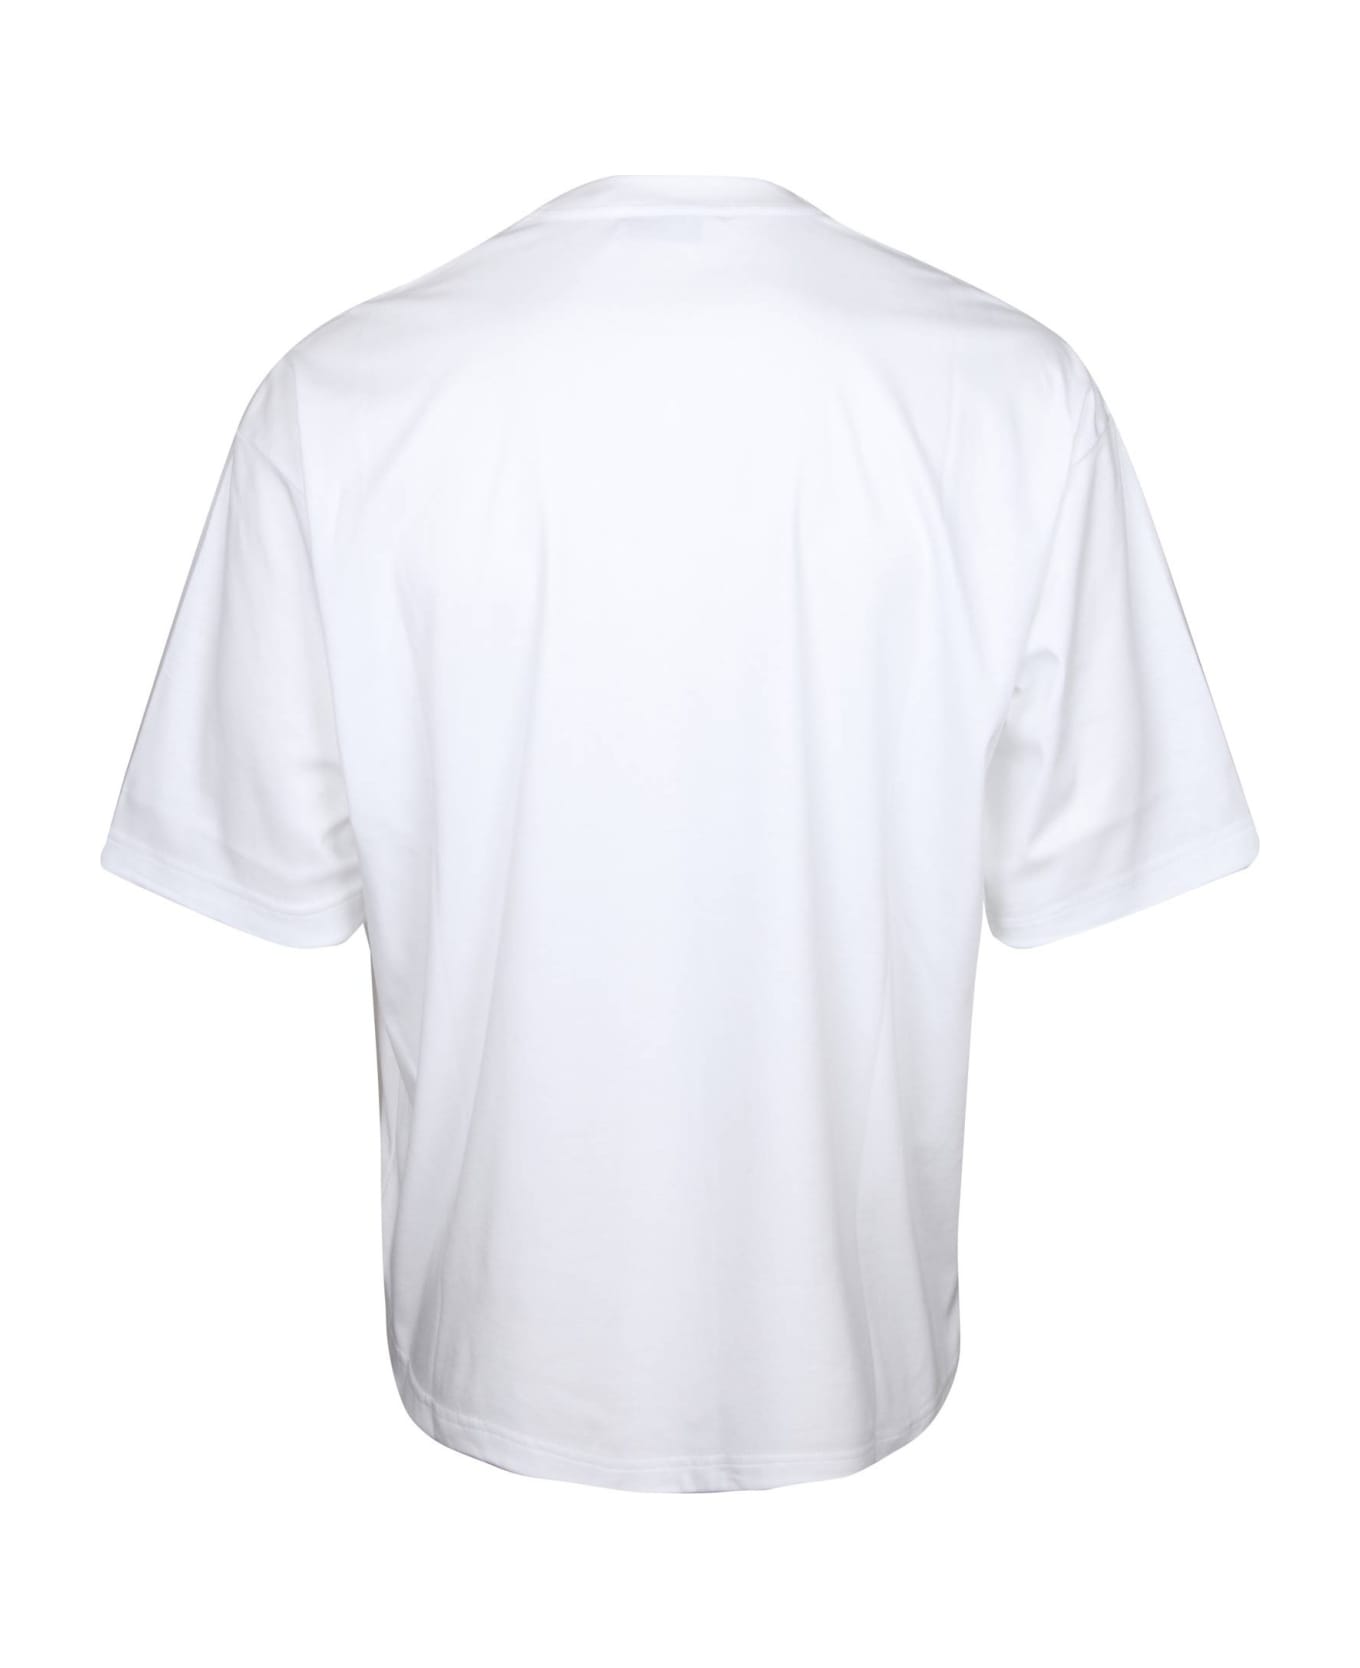 Lanvin Curblace T-shirt In White Cotton - Optic White シャツ